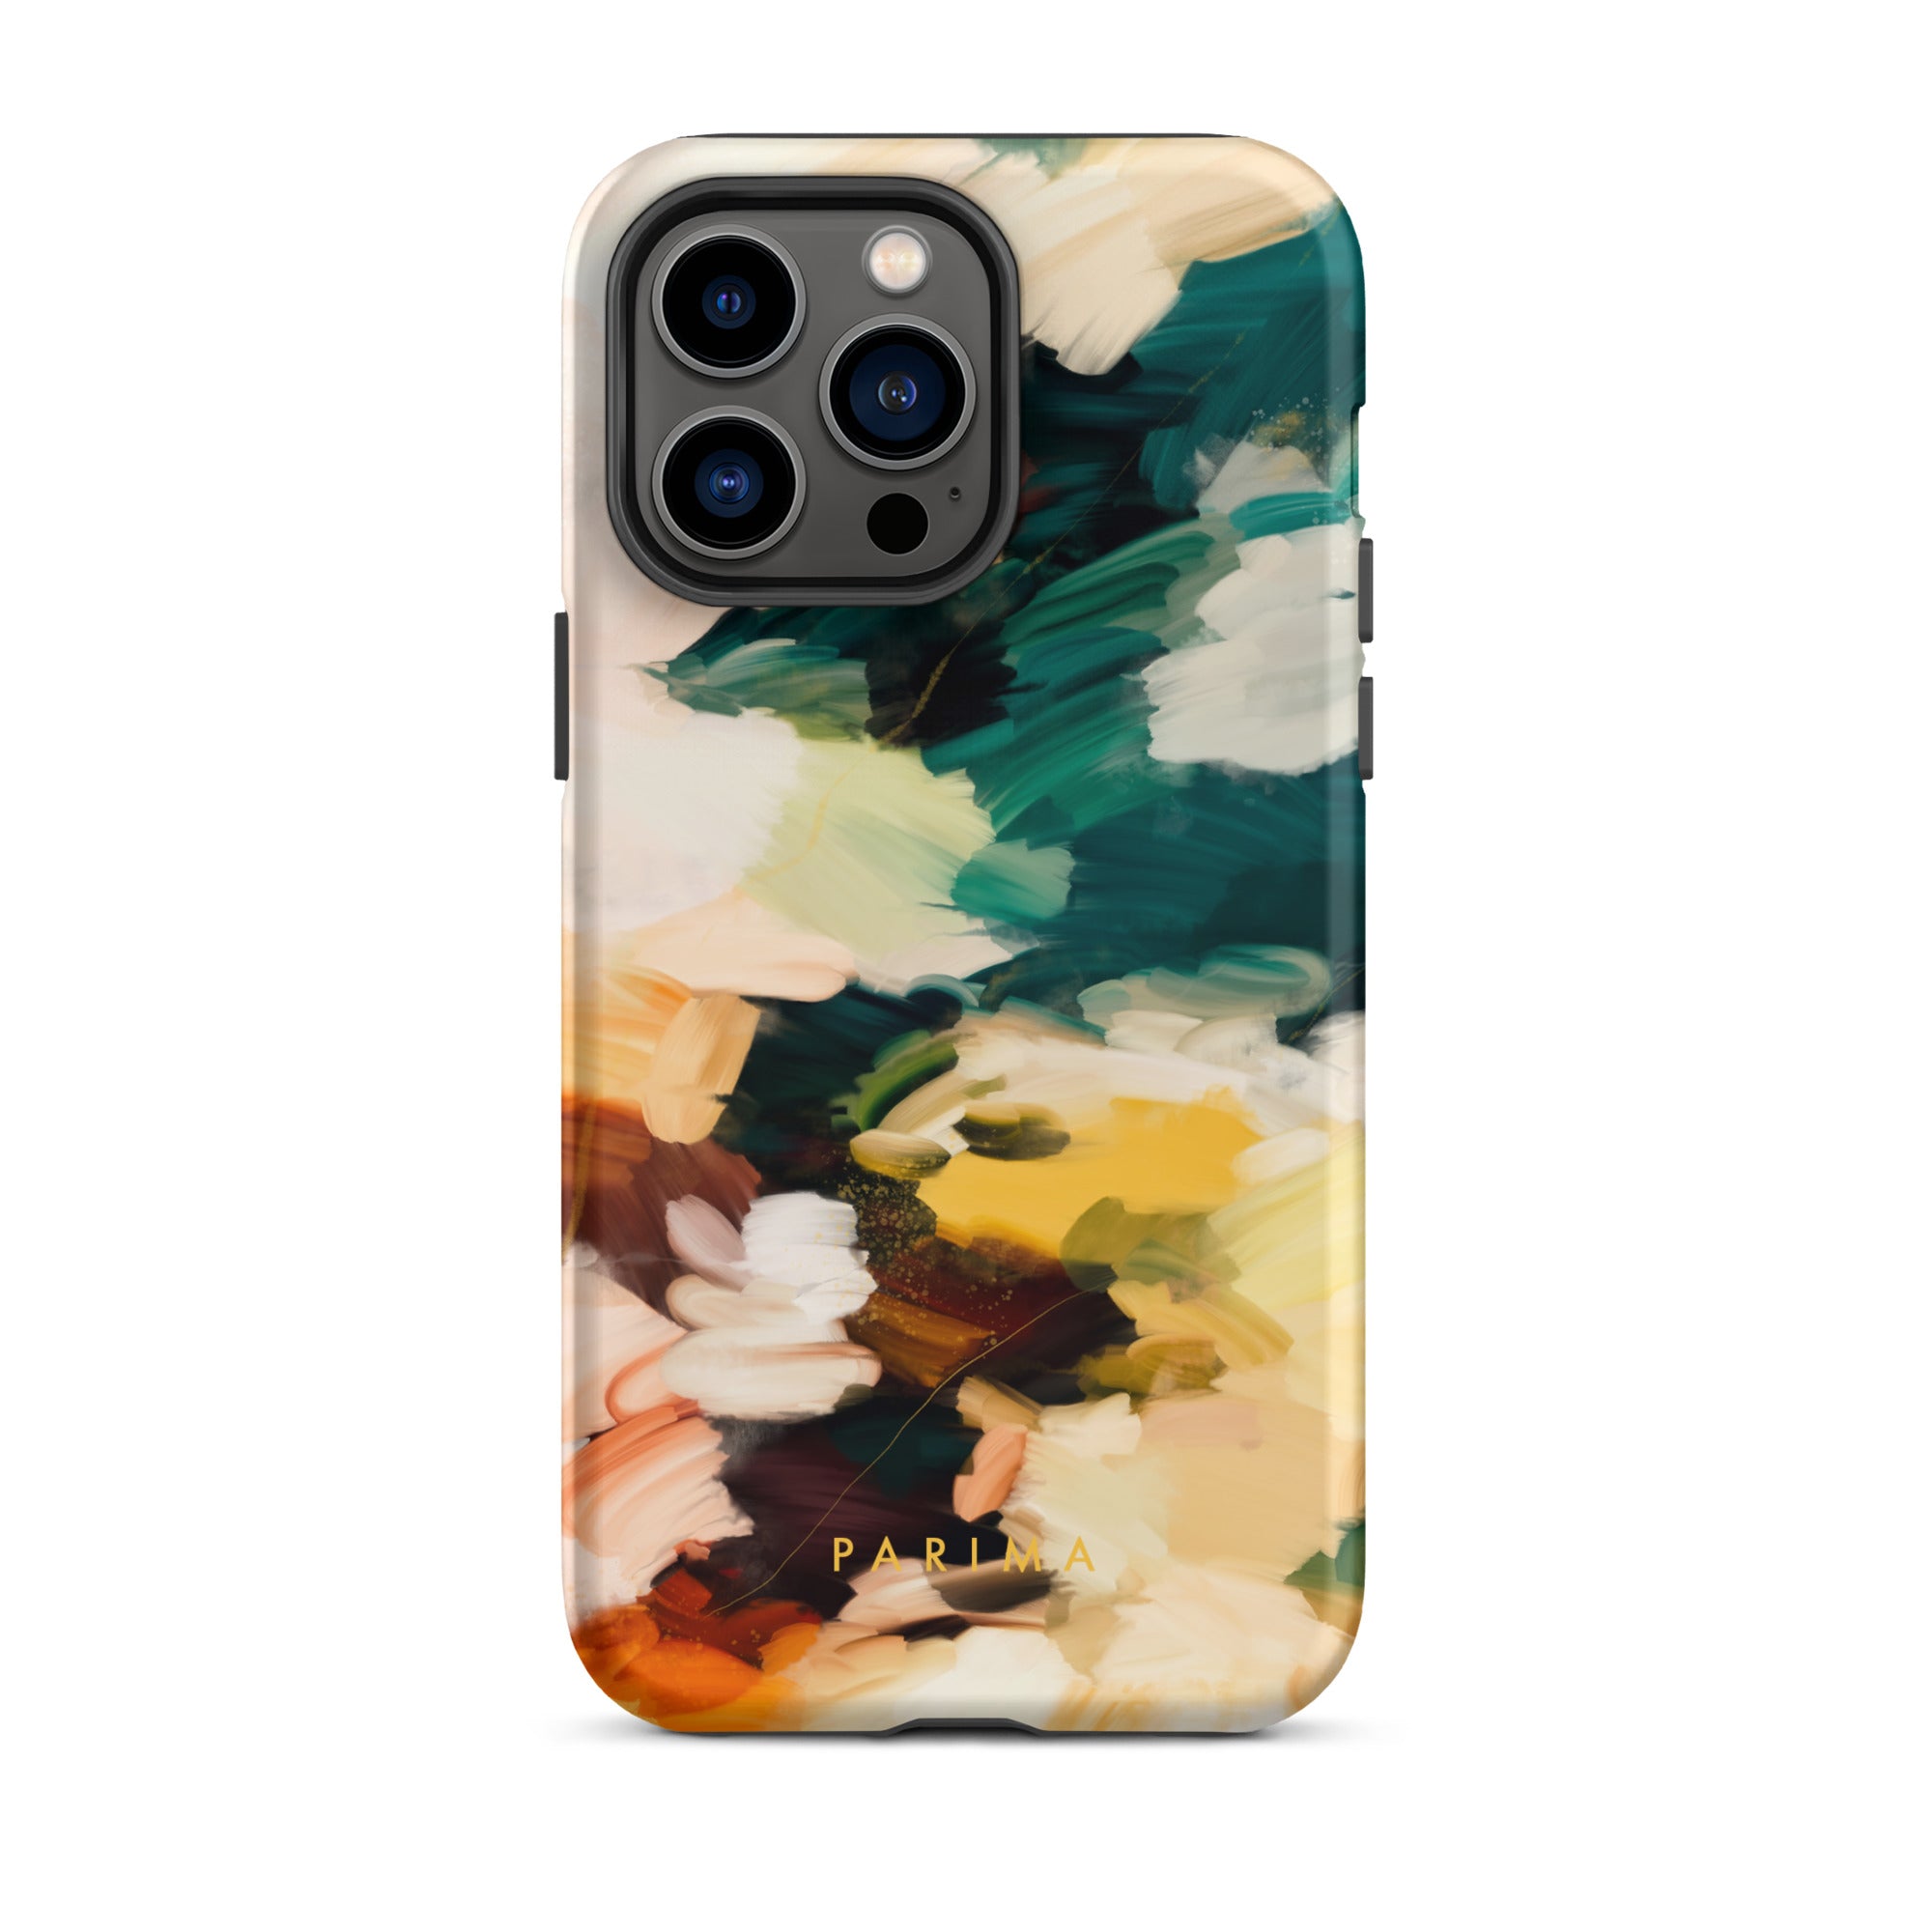 Cinque Terre, green and yellow abstract art - iPhone 14 Pro Max tough case by Parima Studio